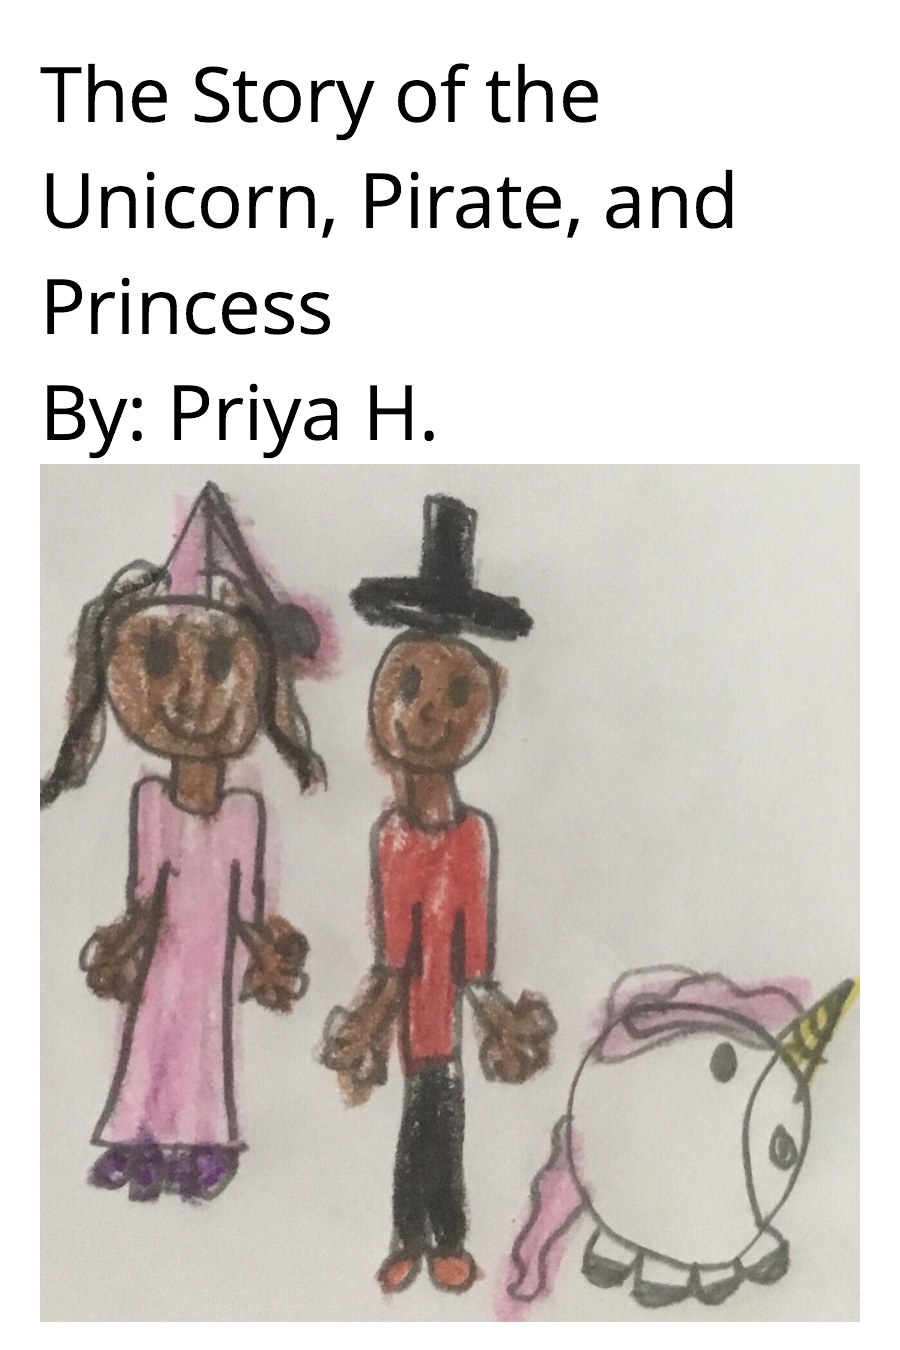 The story of the unicorn pirate and princess